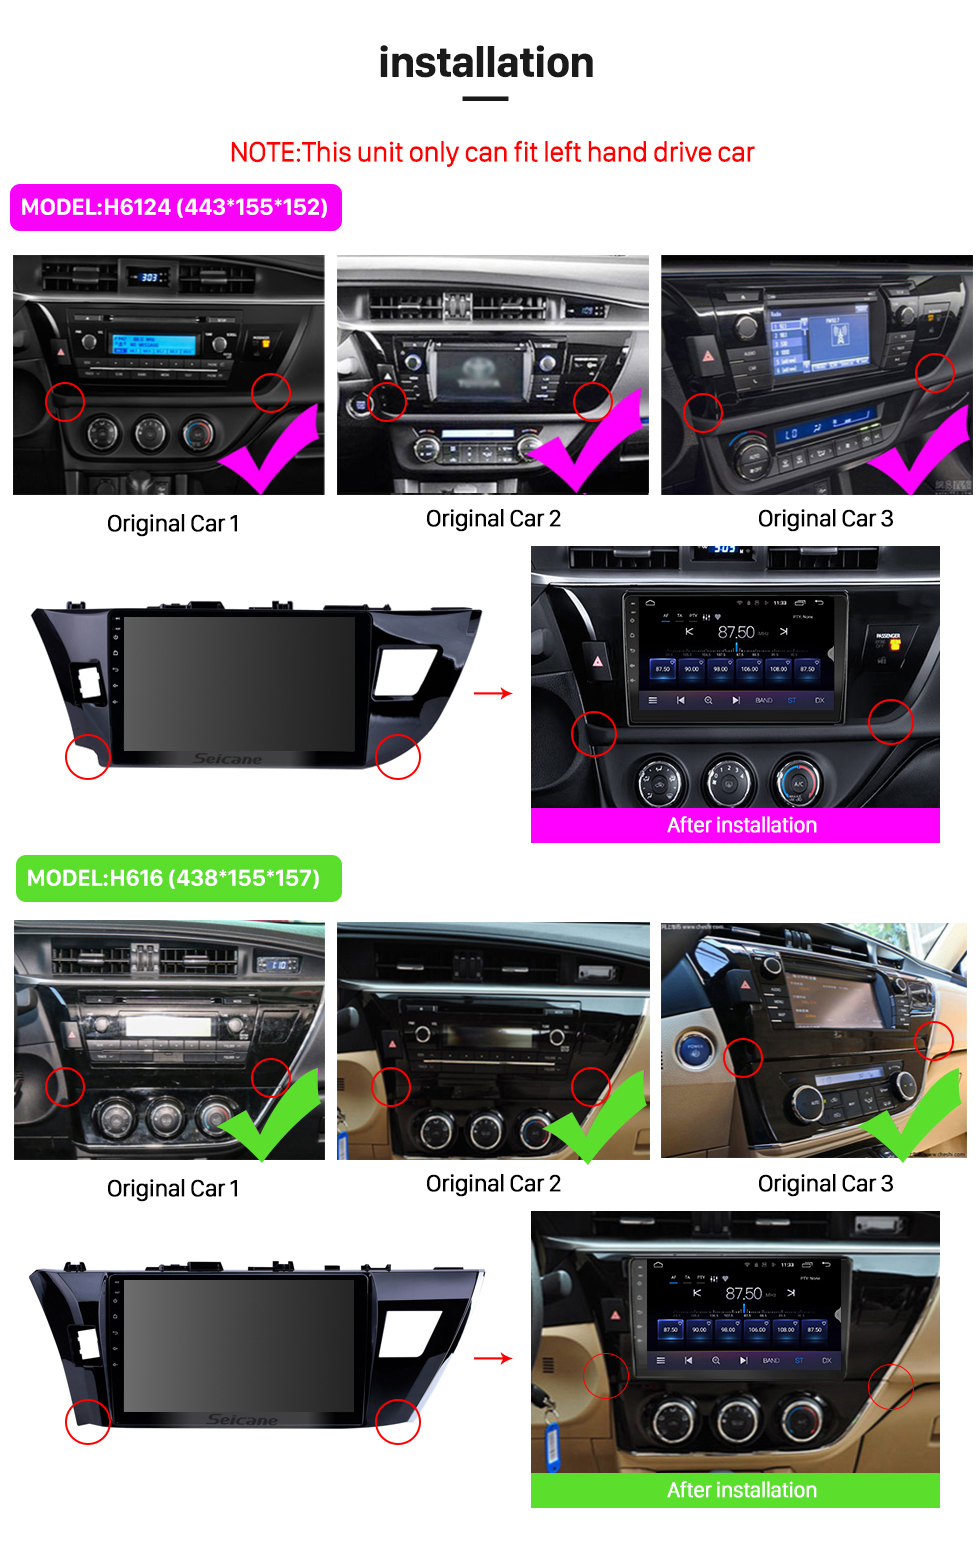 Seicane For Toyota Corolla 11 2012-2014 2015 2016 E170 E180 radio navigation system Android 10.0 HD Touchscreen 10.1 inch car dvd player with WIFI Bluetooth support Carplay DVR 